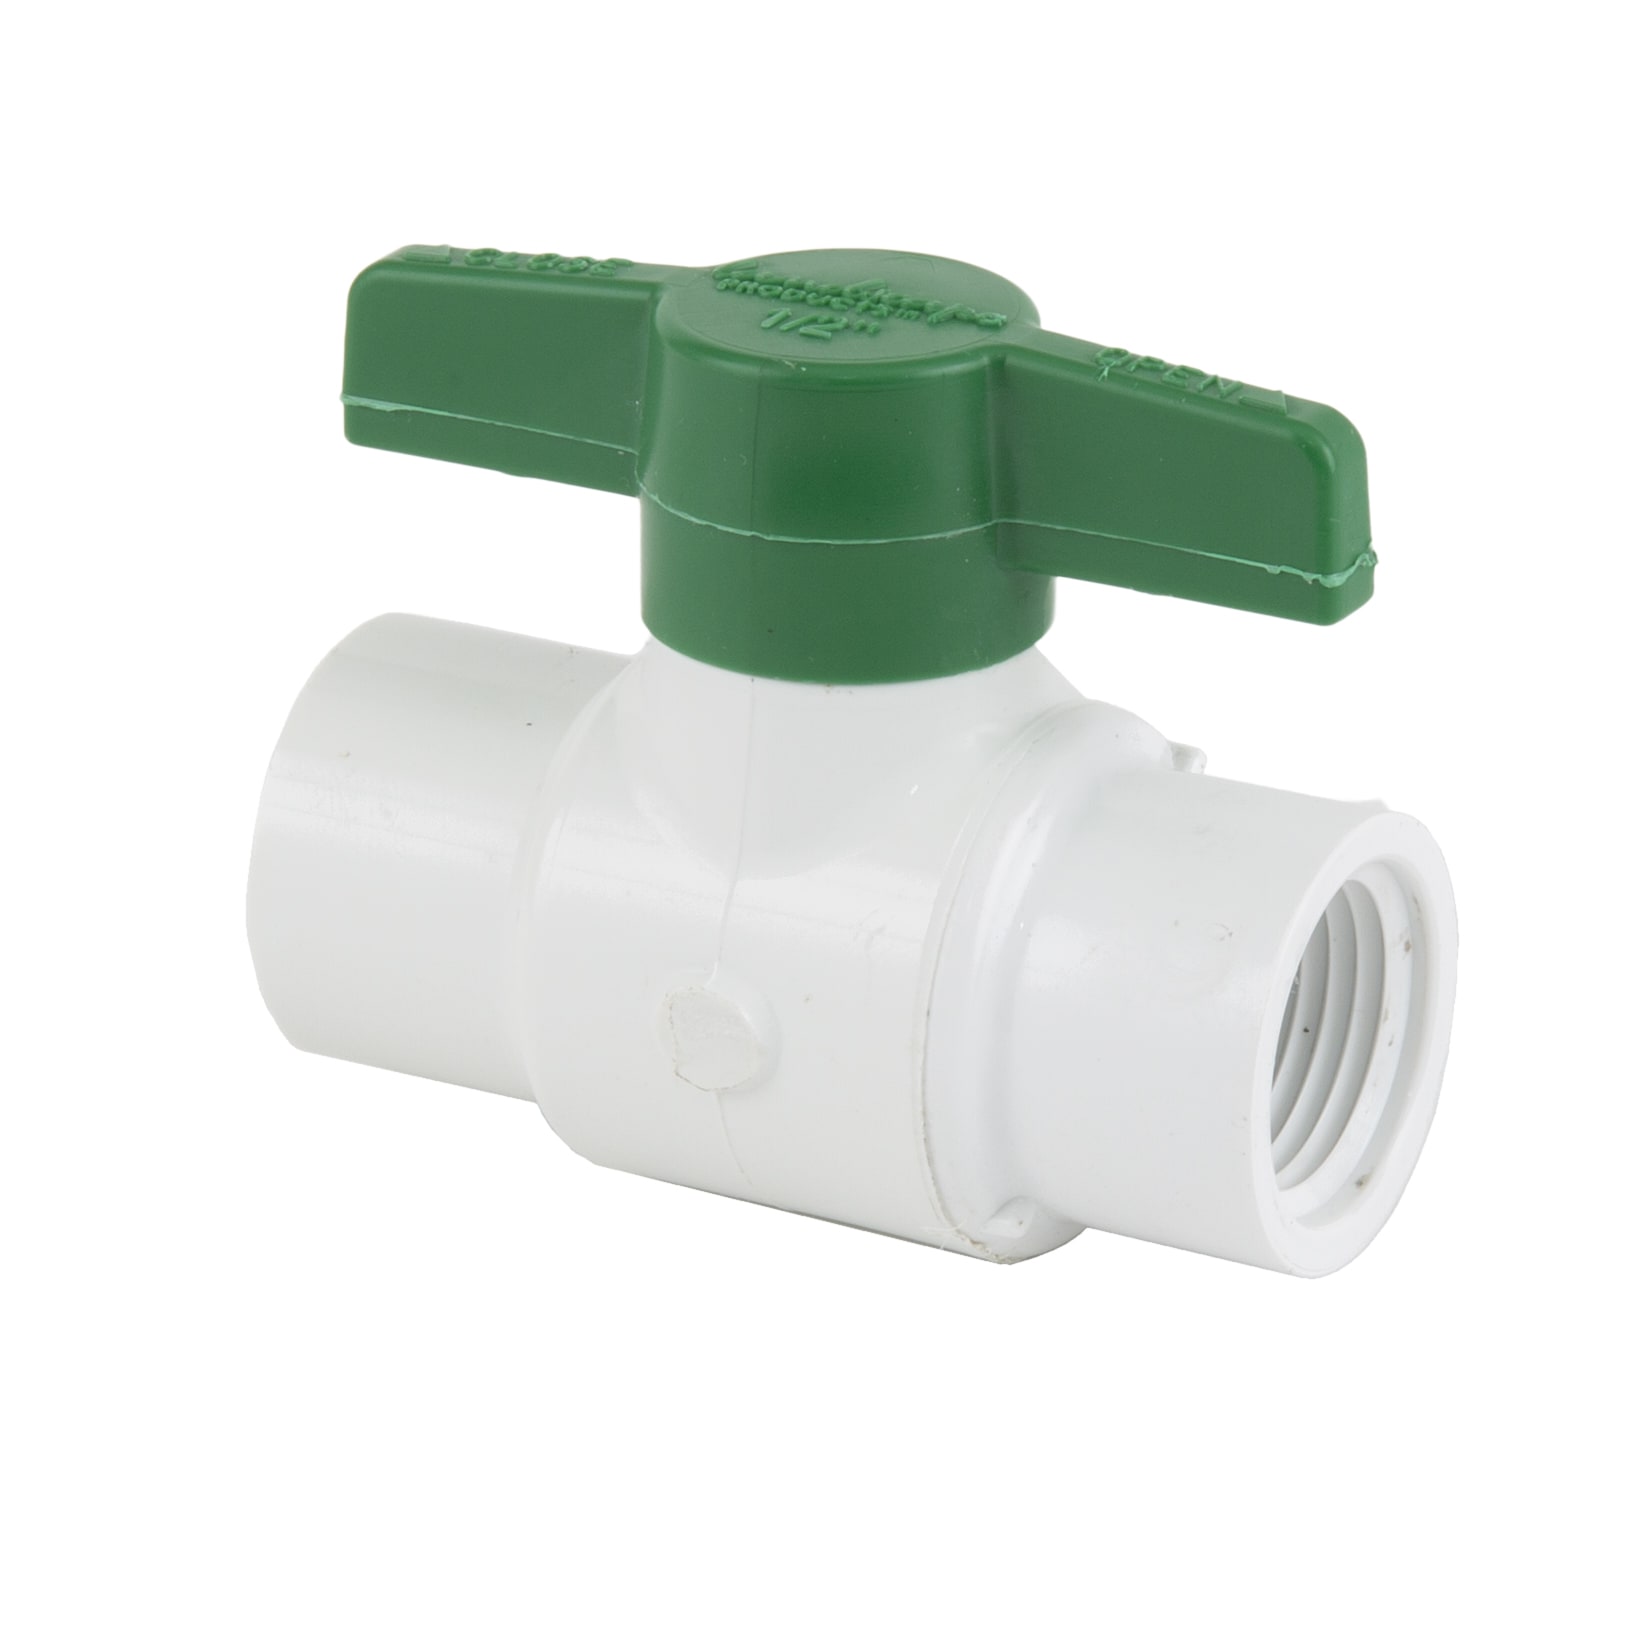 1-inch Threaded Plastic Ball Valve - Landscape Products Inc.